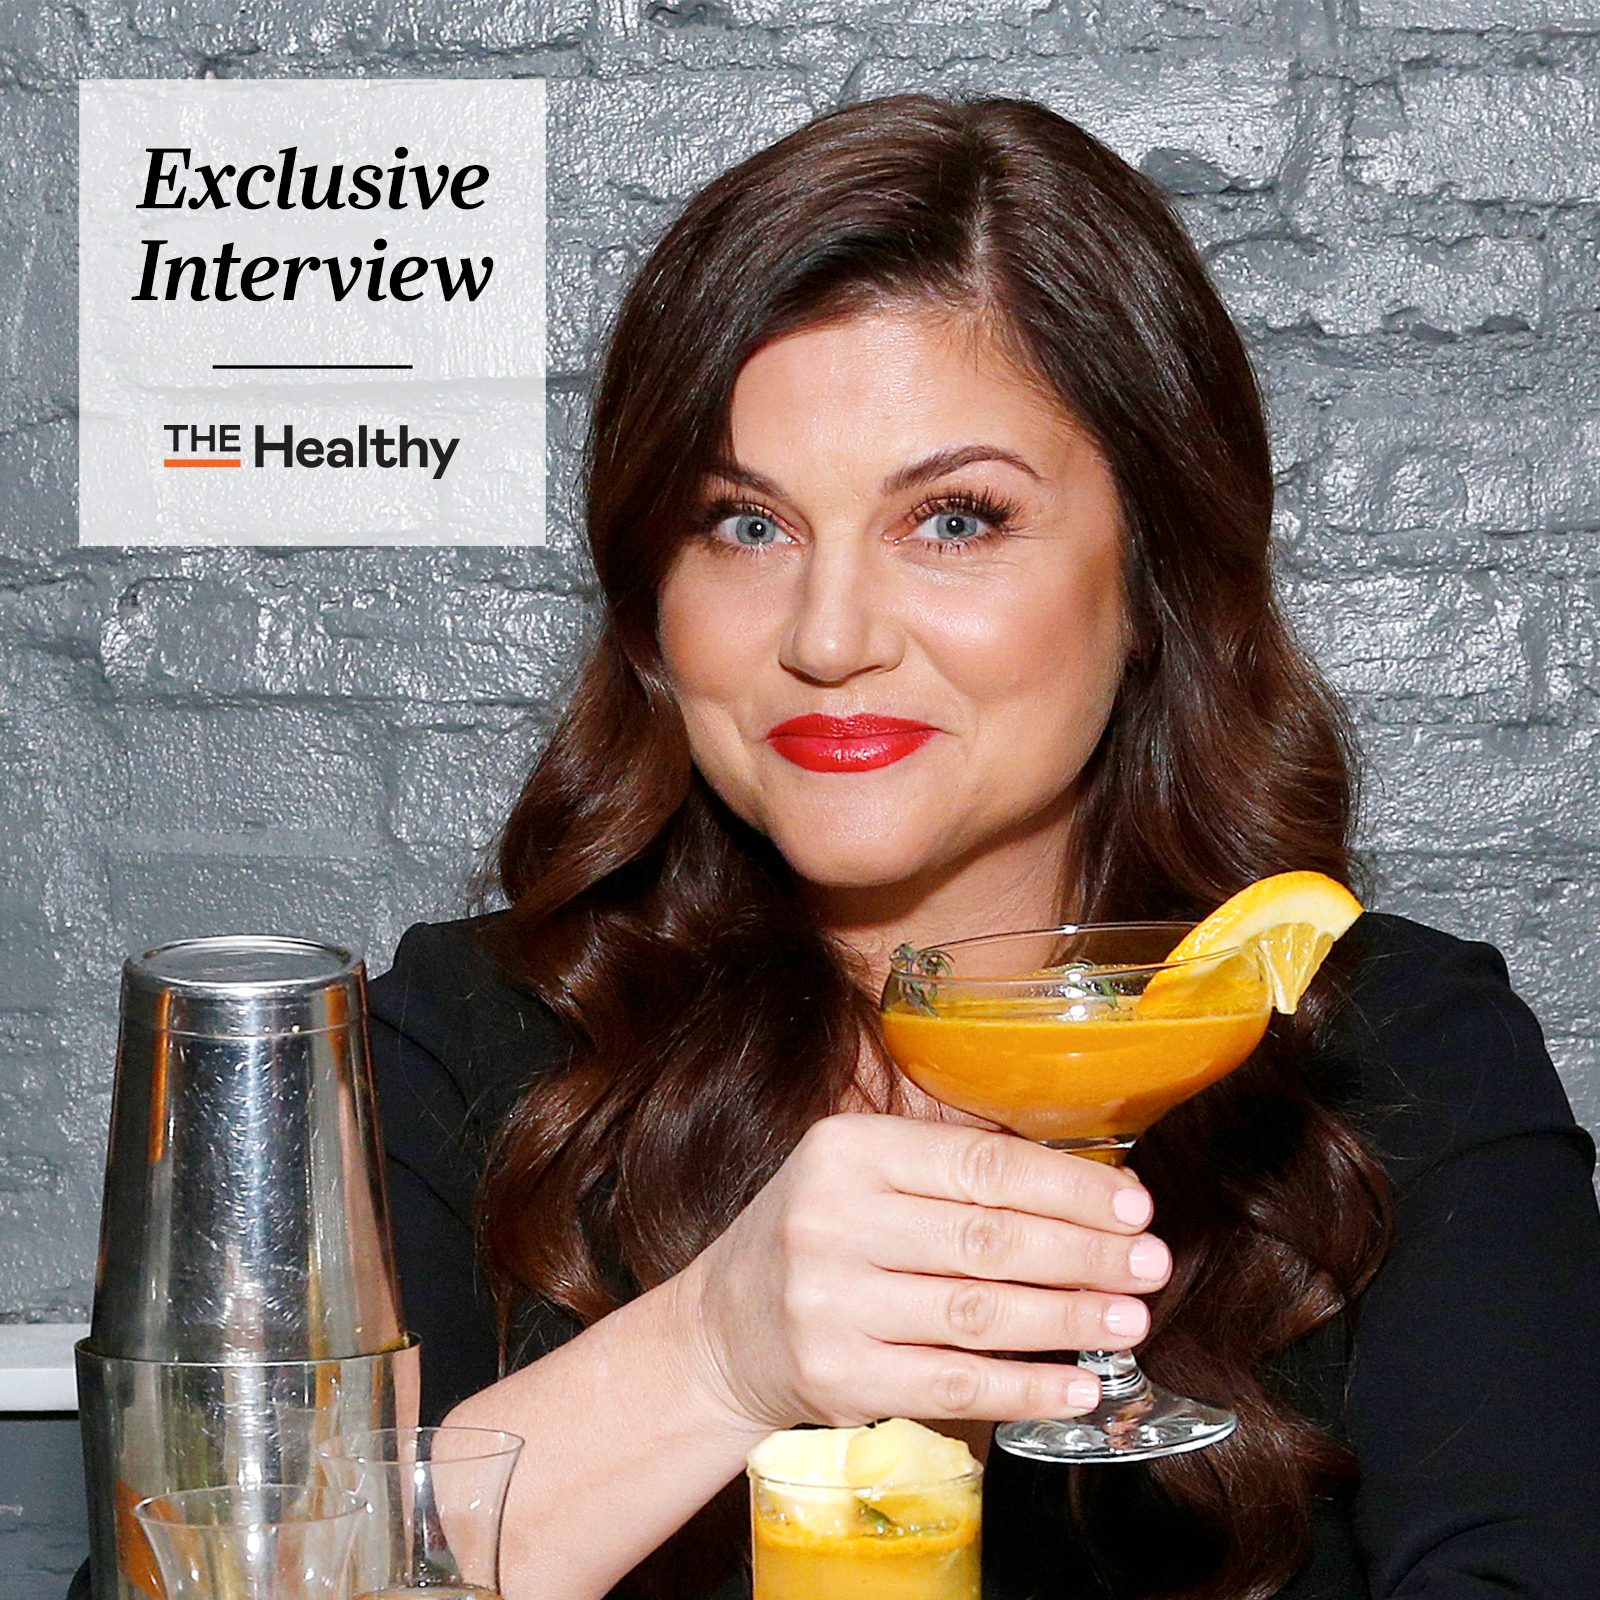 Tiffani Thiessen's New Cookbook Might Have Just Changed Our Minds About an Unappreciated Meal